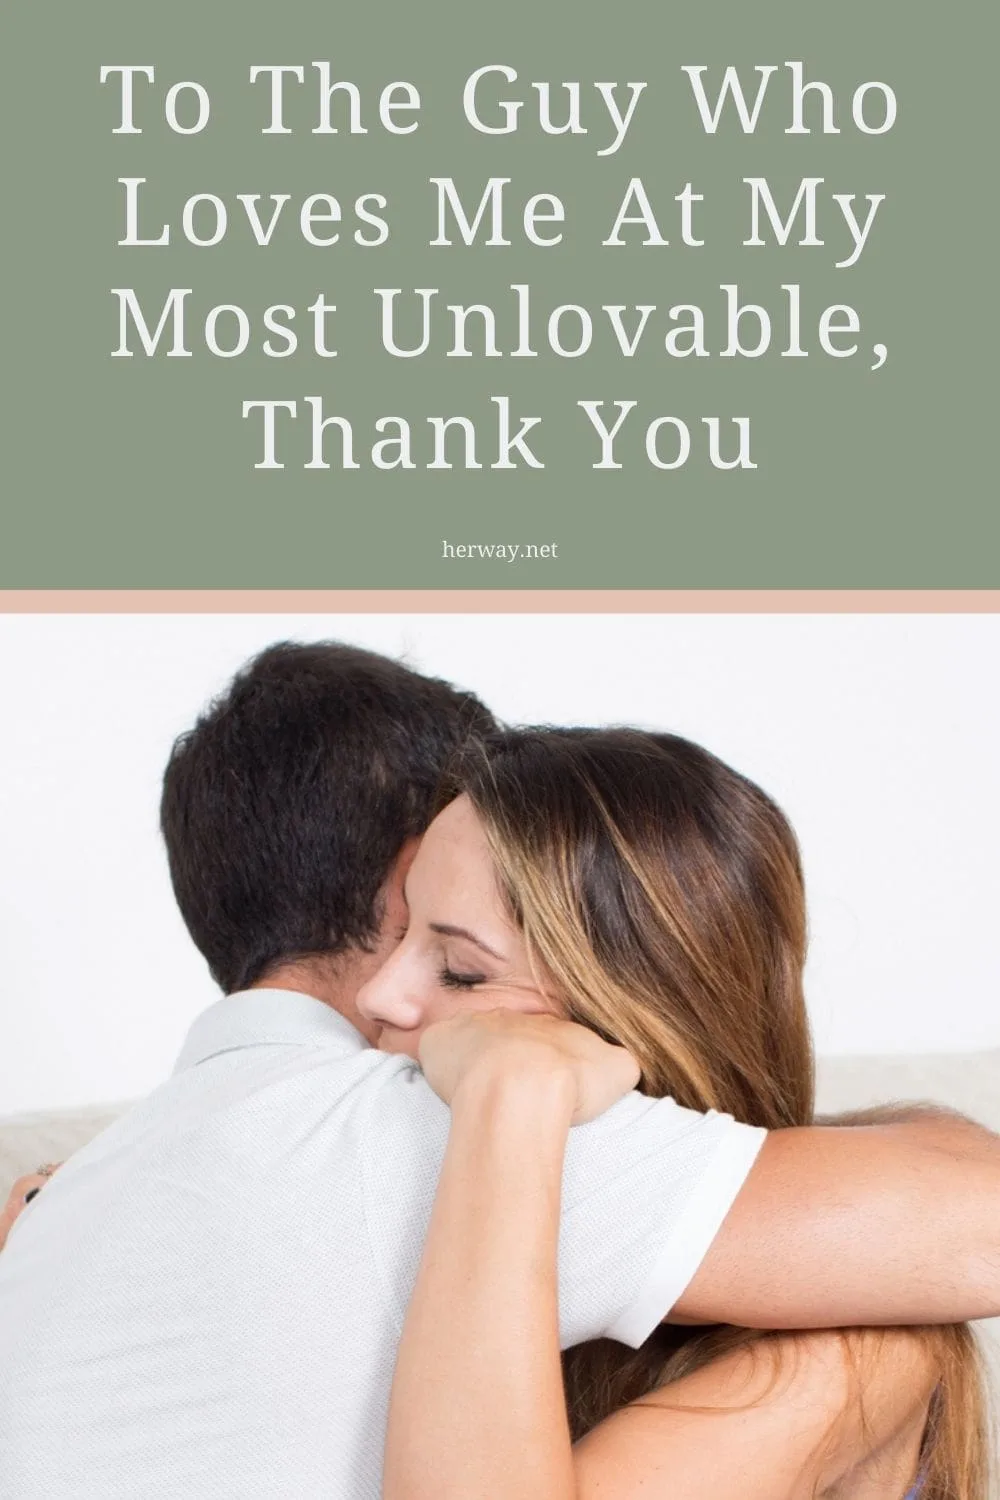 To The Guy Who Loves Me At My Most Unlovable, Thank You